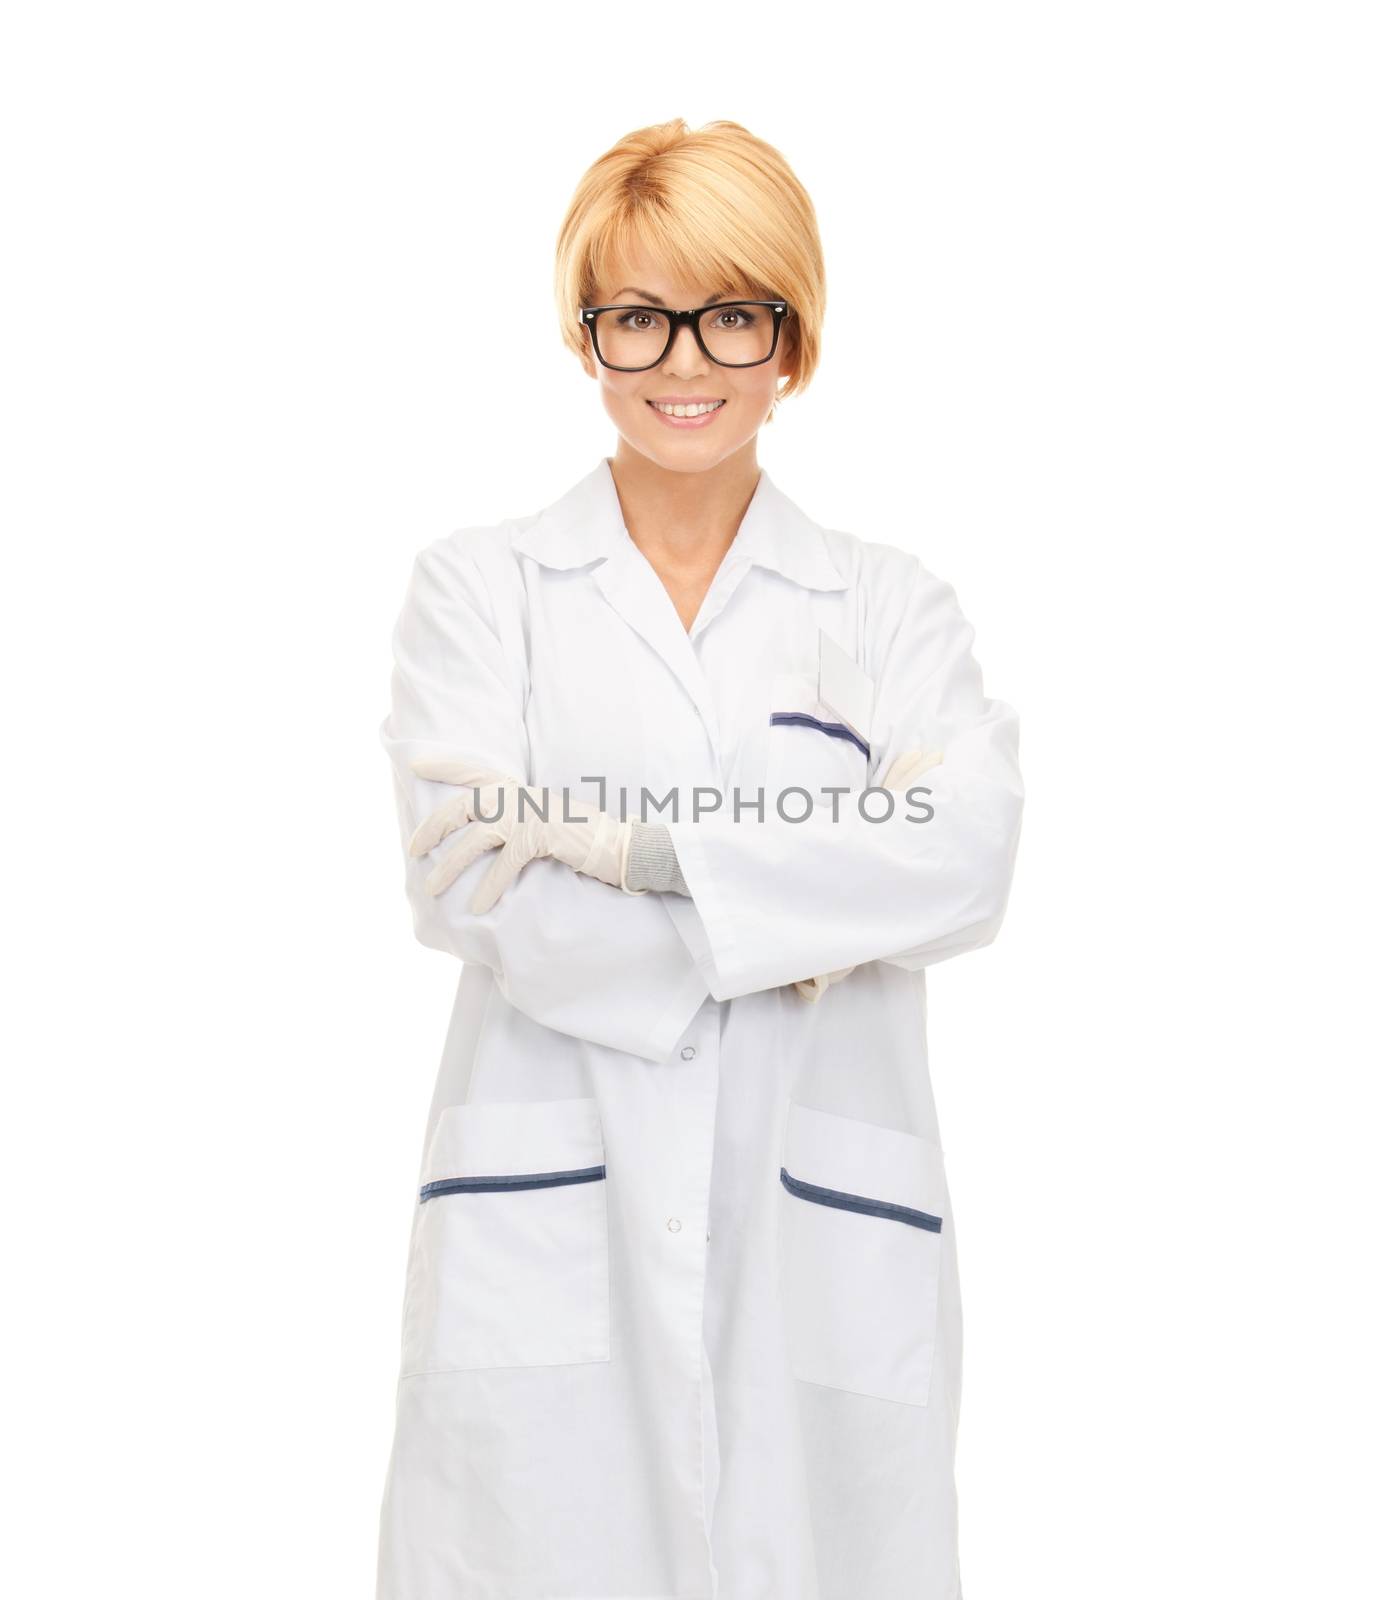 healthcare and medical concept - smiling female doctor in glasses